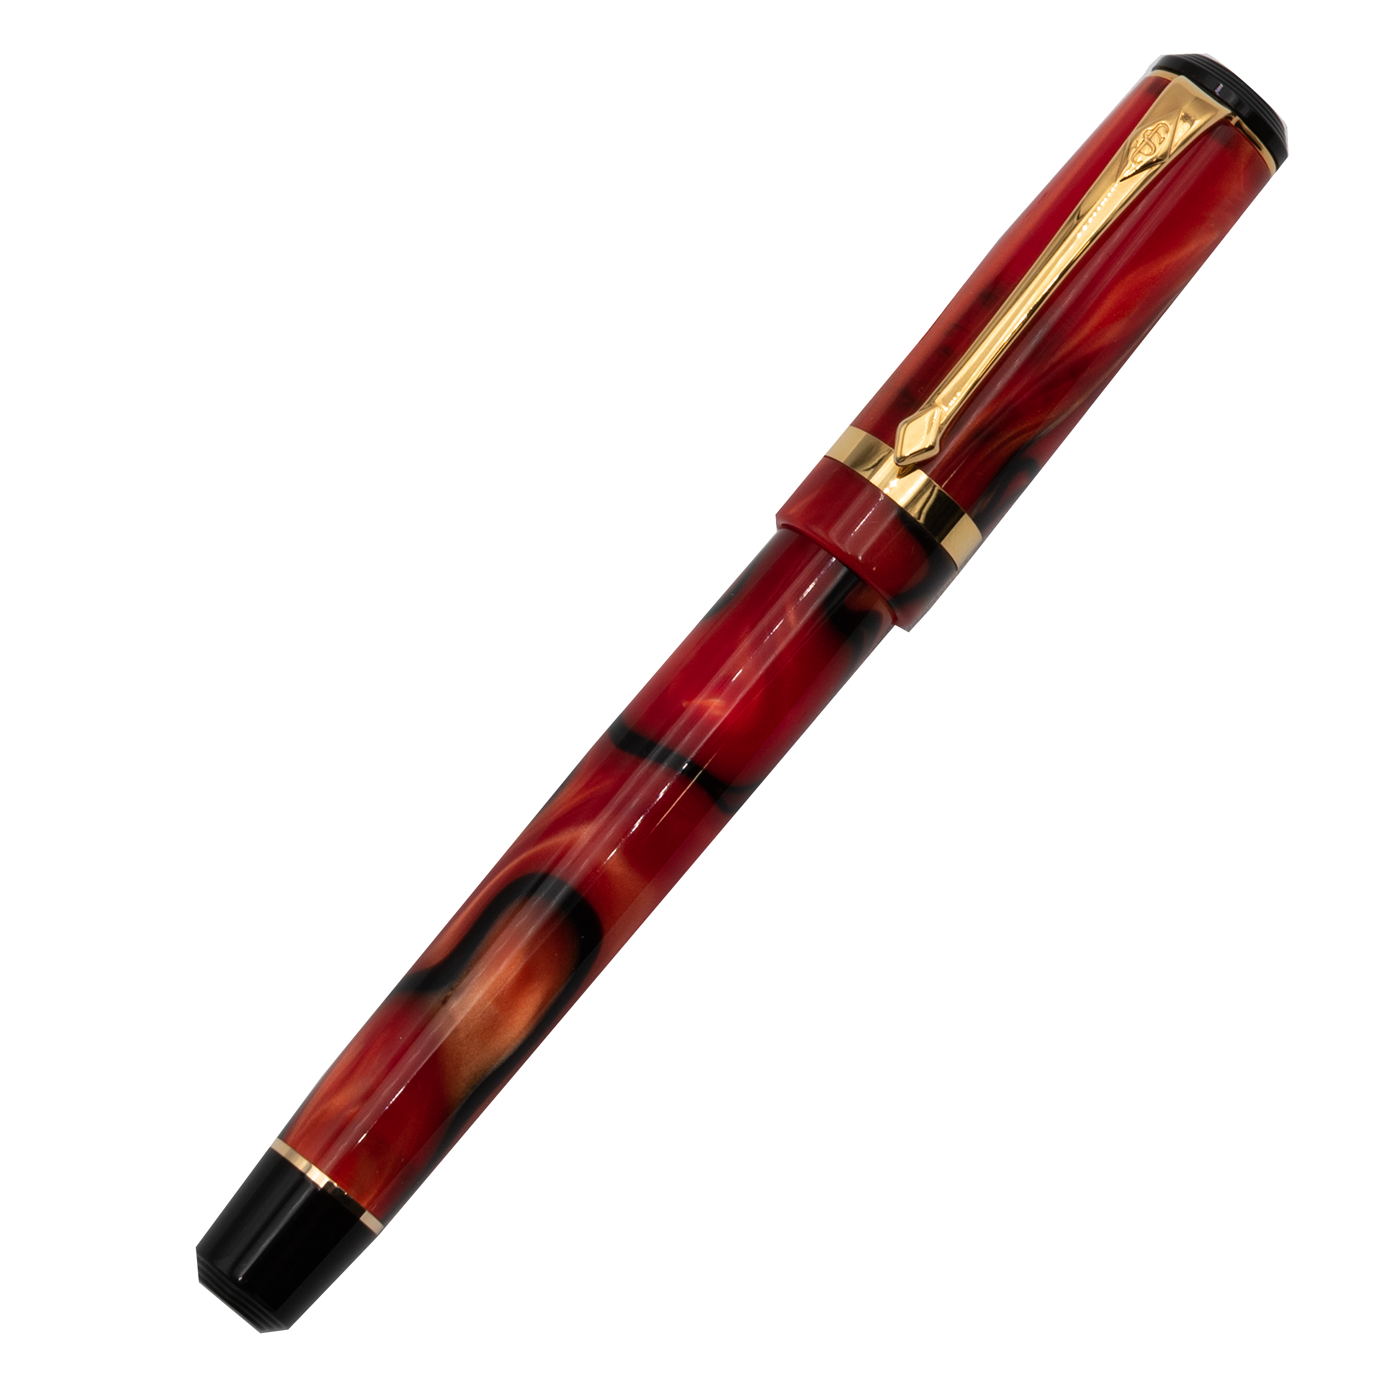 Conway Stewart "Collectors Pen" Black Whirl